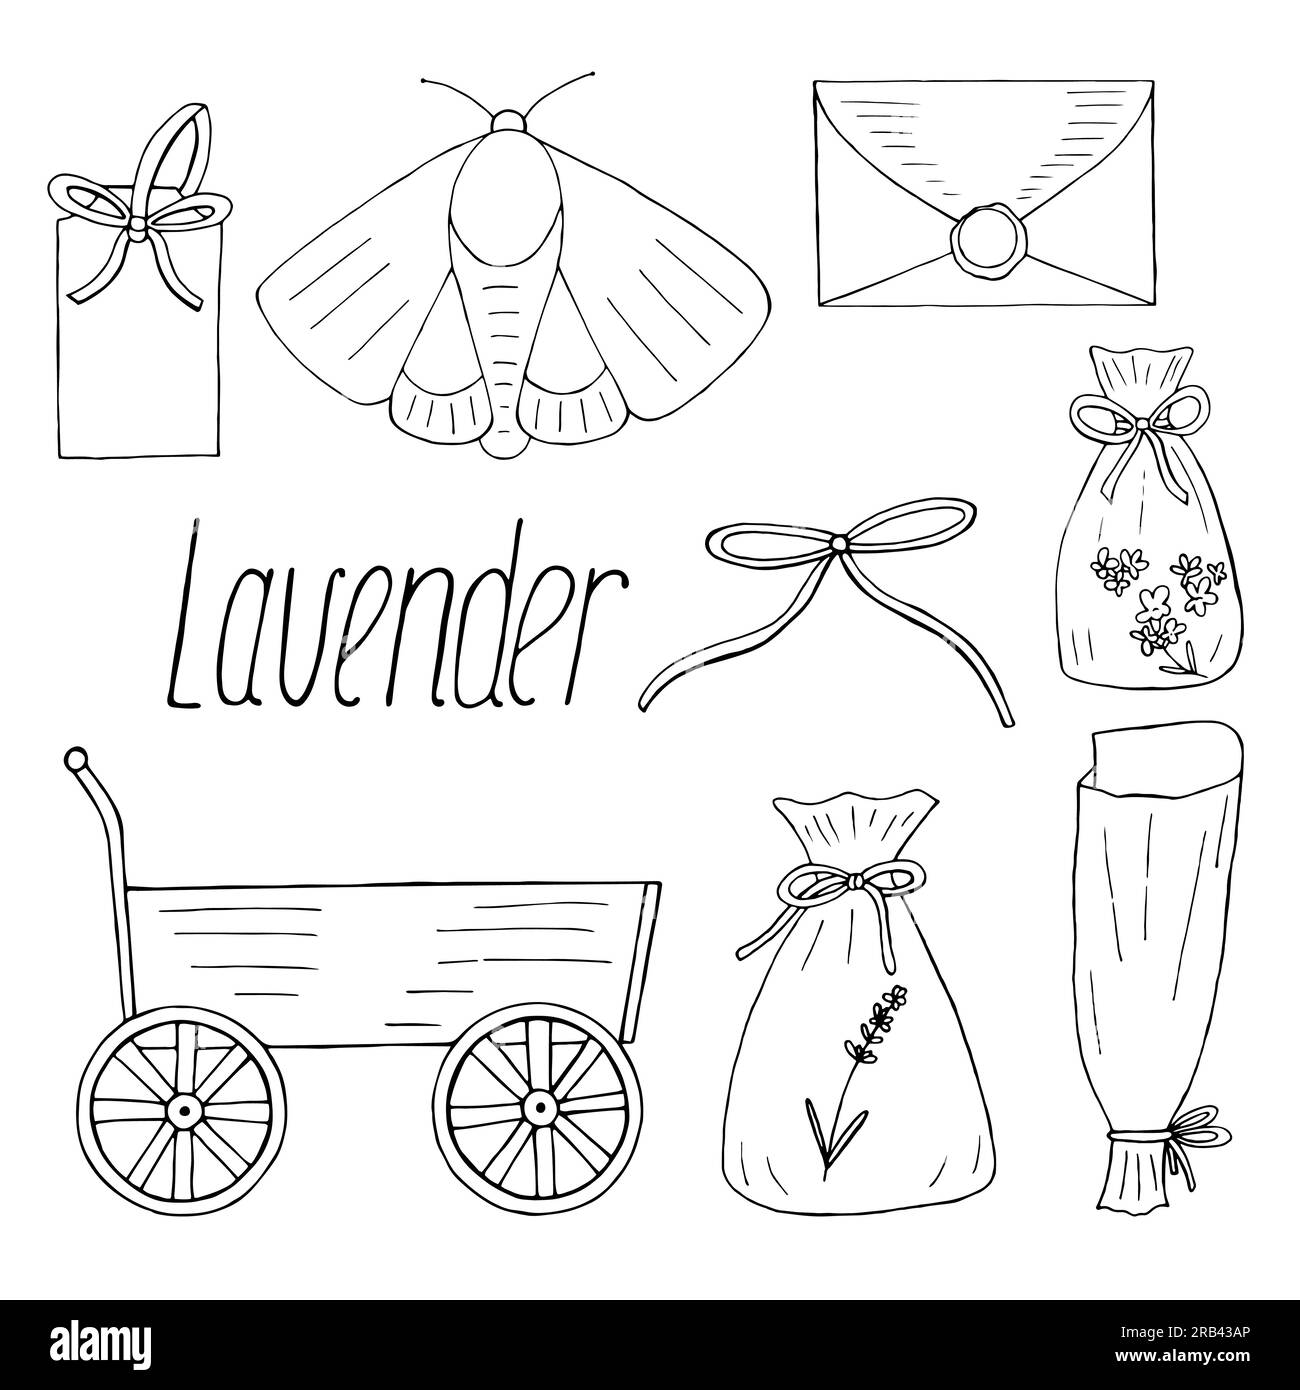 Lavender aesthetic set, vector floral hand drawn bundle isolated elements for design on white background Stock Vector